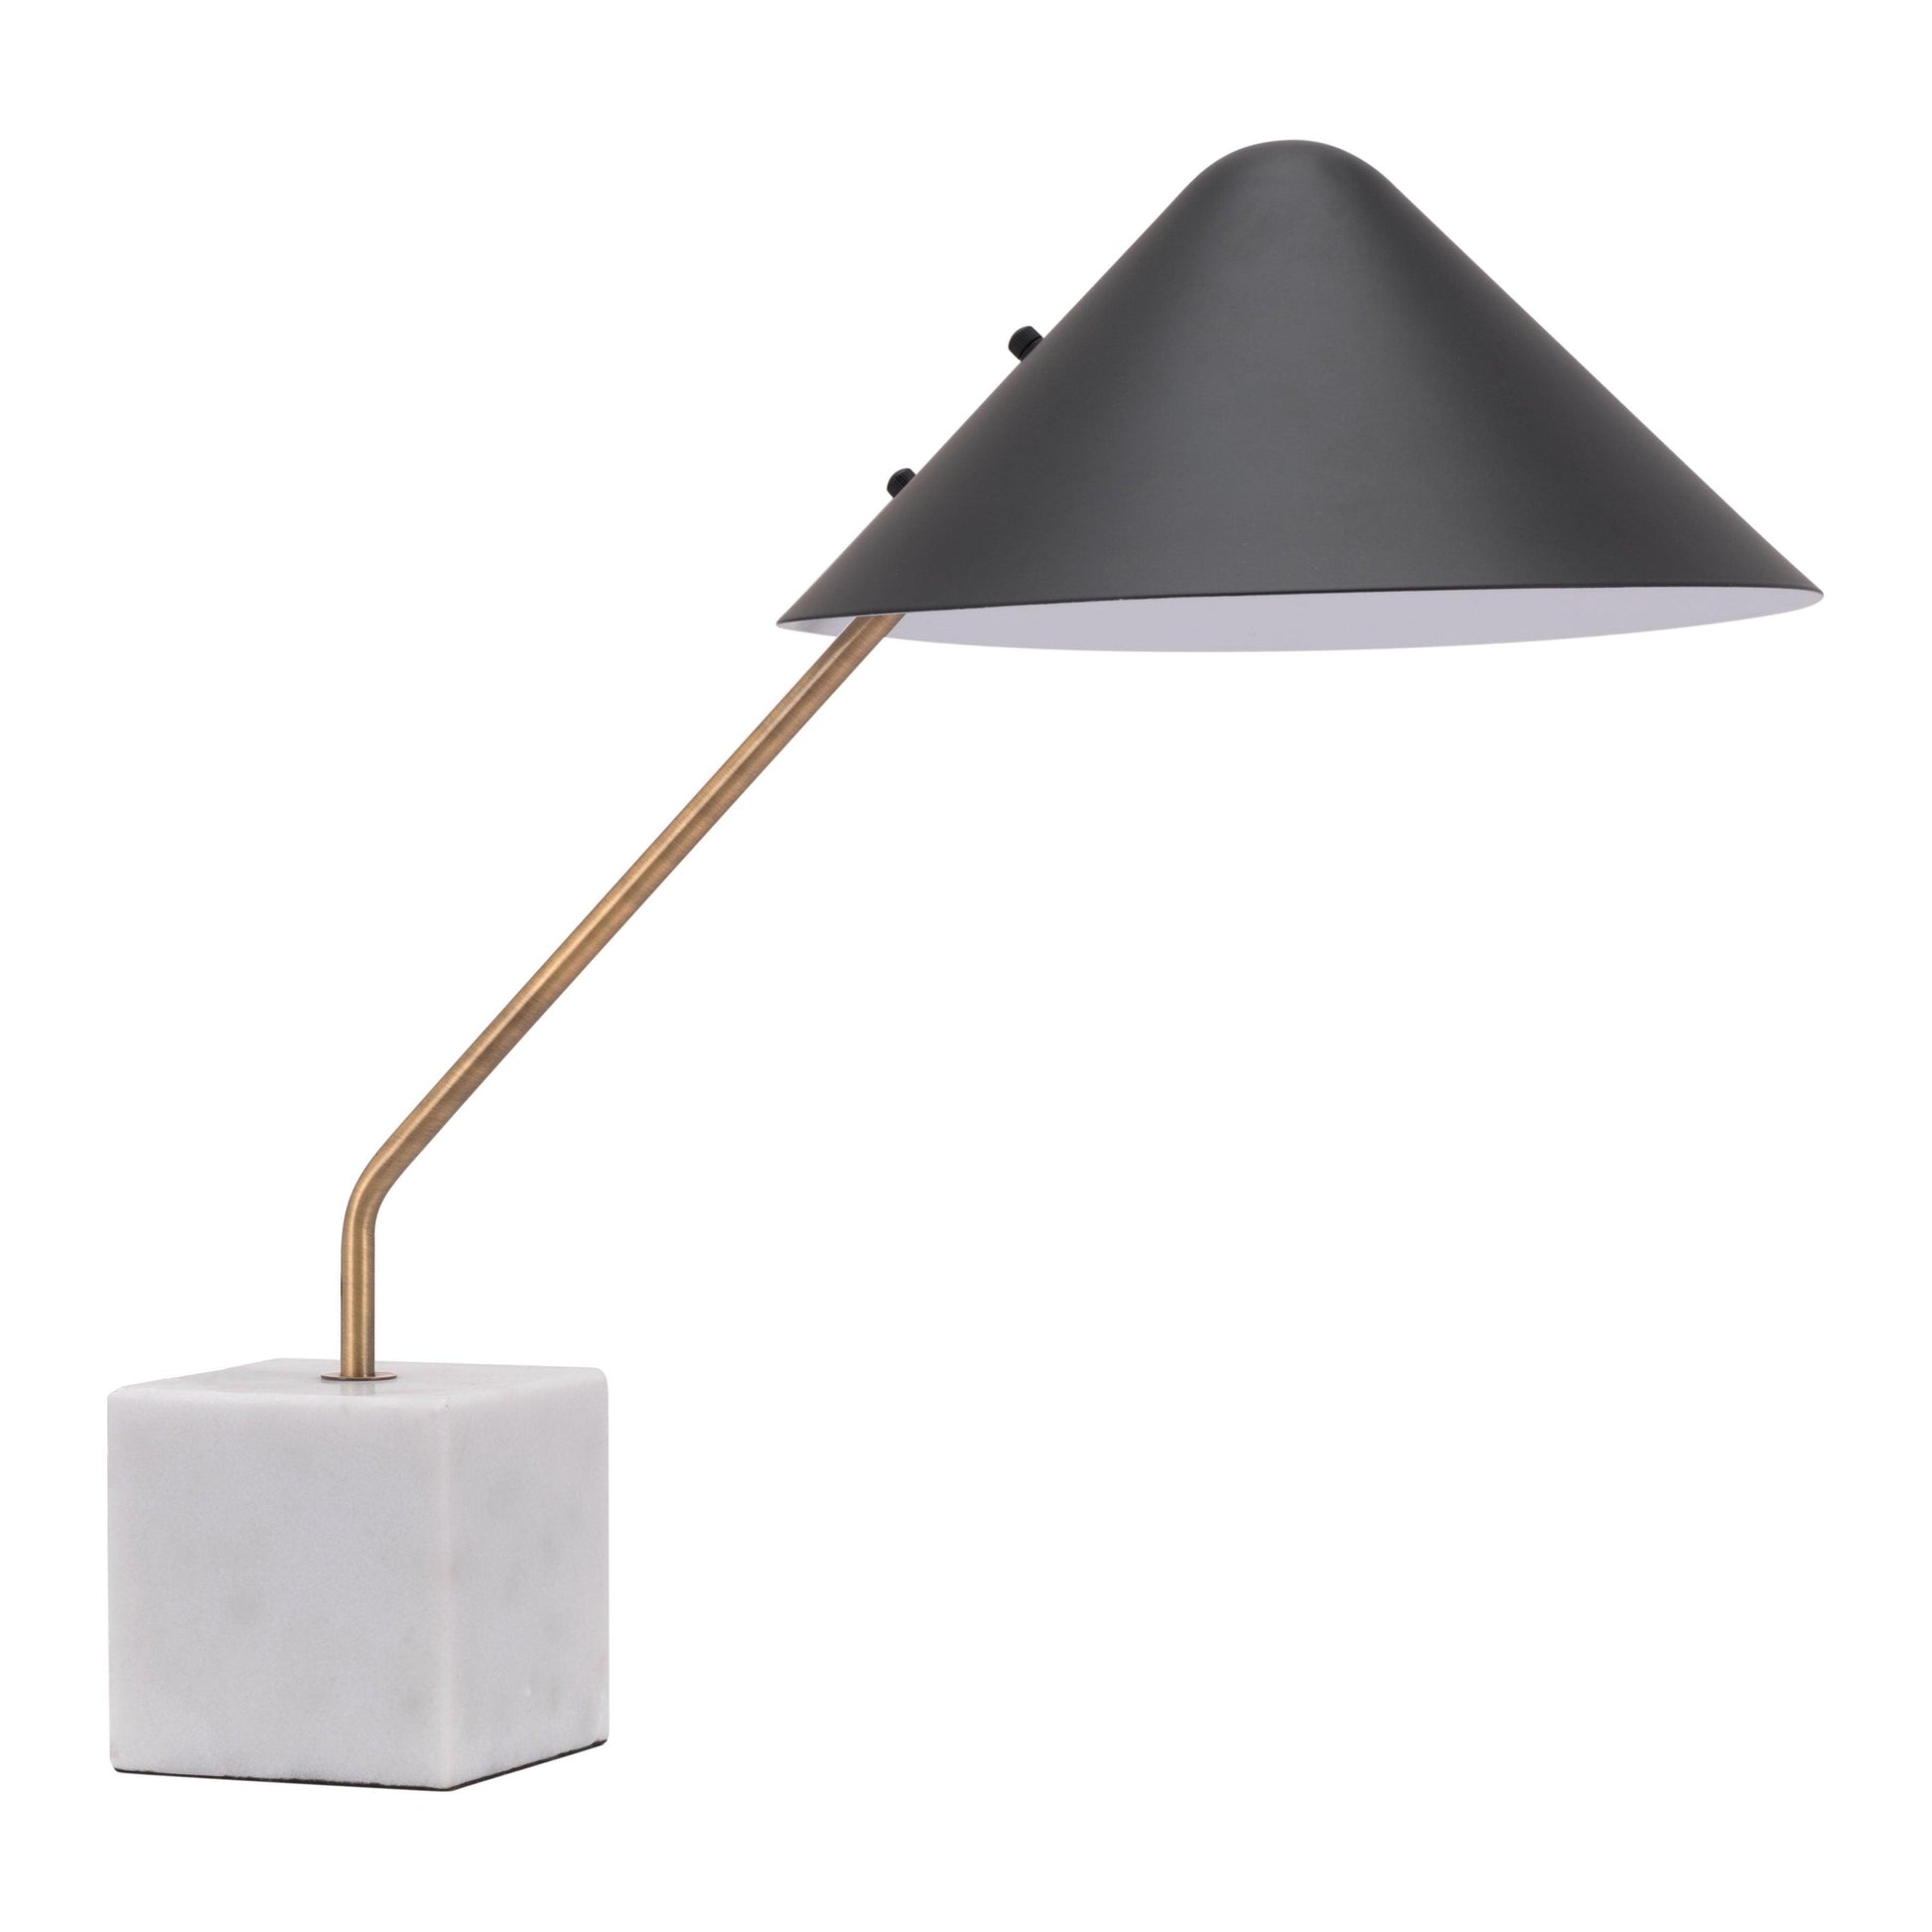 Pike Table Lamp Black & White - Sideboards and Things Brand_Zuo Modern, Color_Black, Depth_10-20, Finish_Hand Painted, Finish_Polished, Height_20-30, Materials_Metal, Materials_Stone, Metal Type_Steel, Product Type_Table Lamp, Stone Type_Marble, Width_20-30